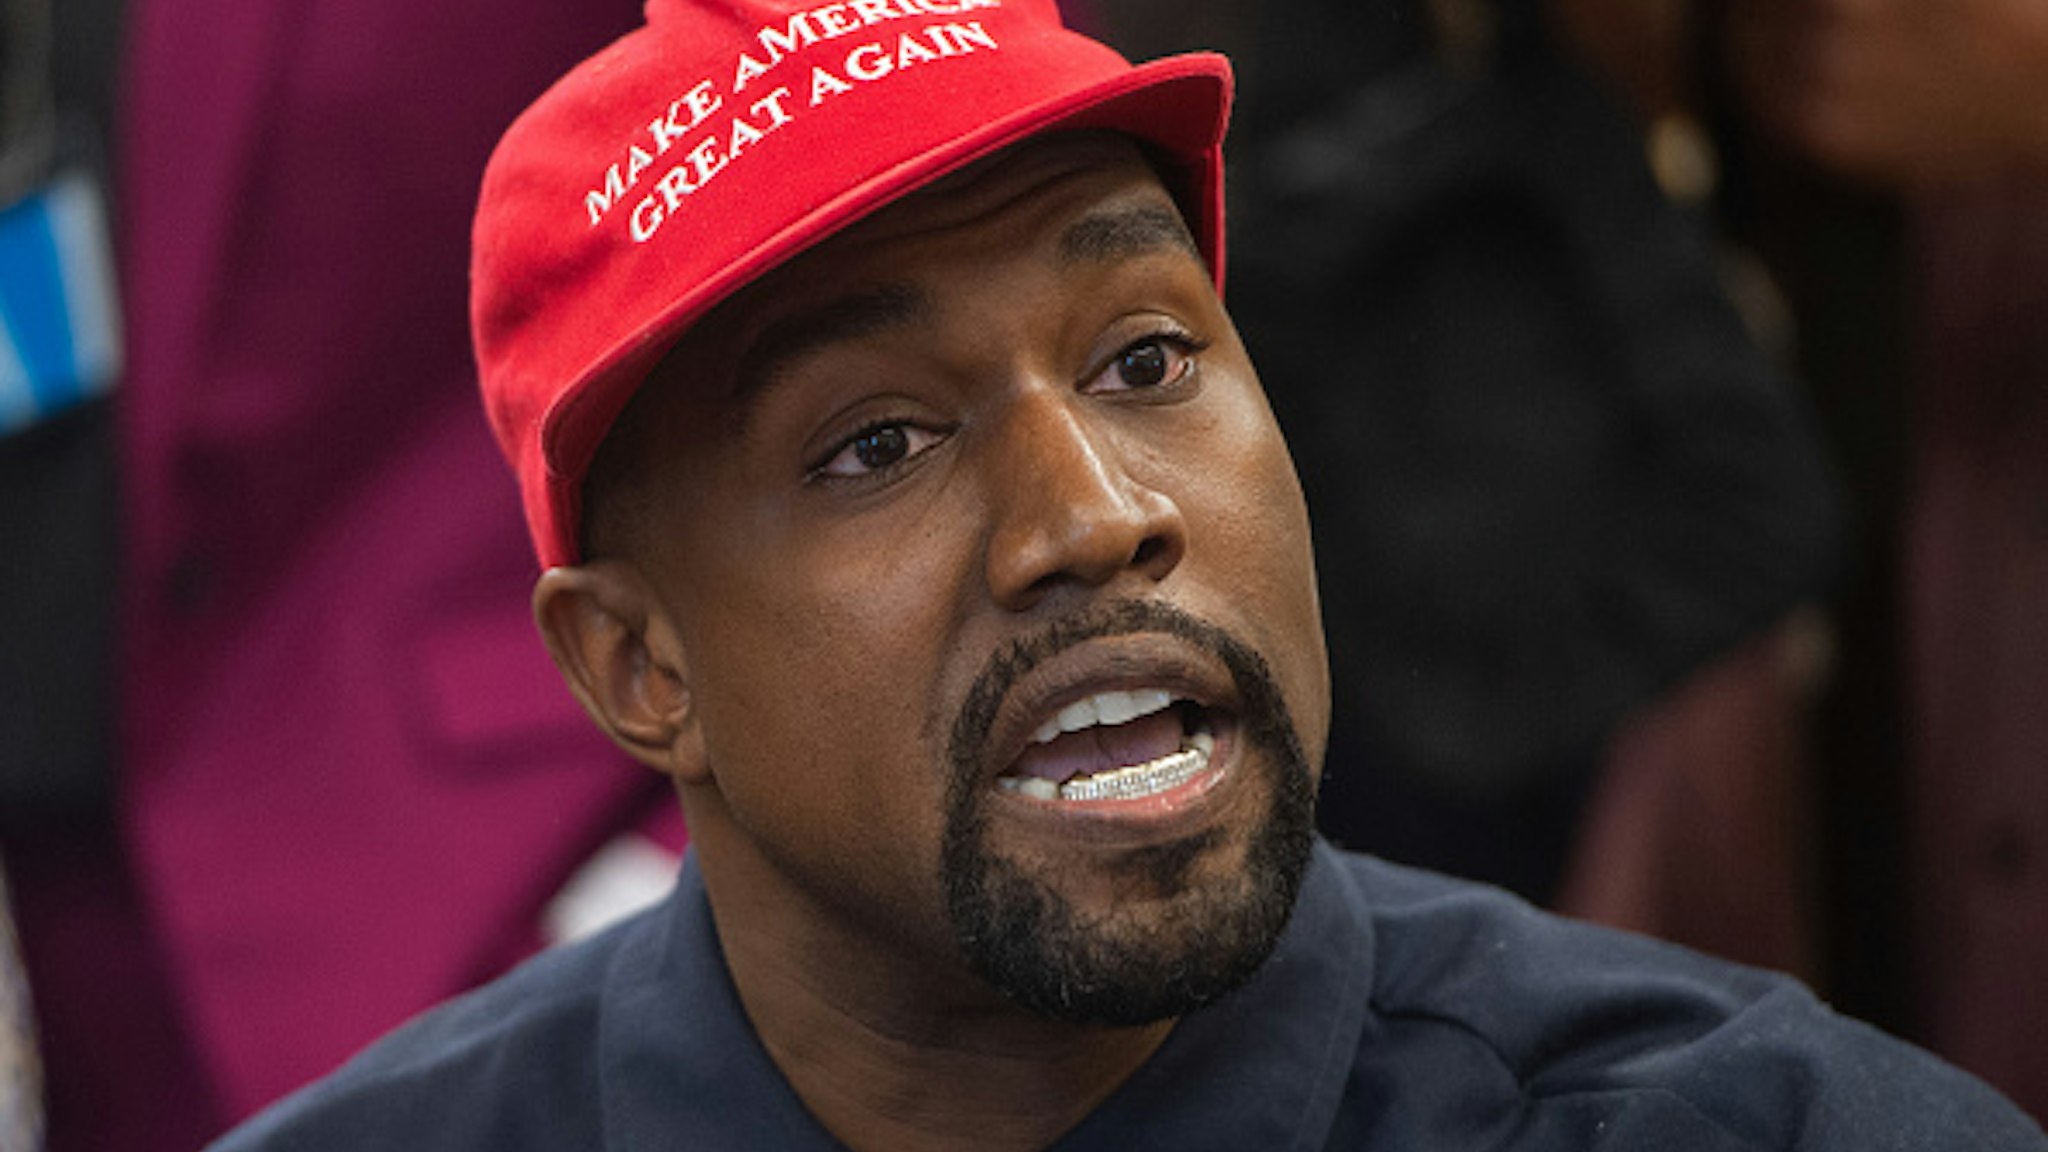 Rapper Kanye West speaks during his meeting with US President Donald Trump in the Oval Office of the White House in Washington, DC, on October 11, 2018.